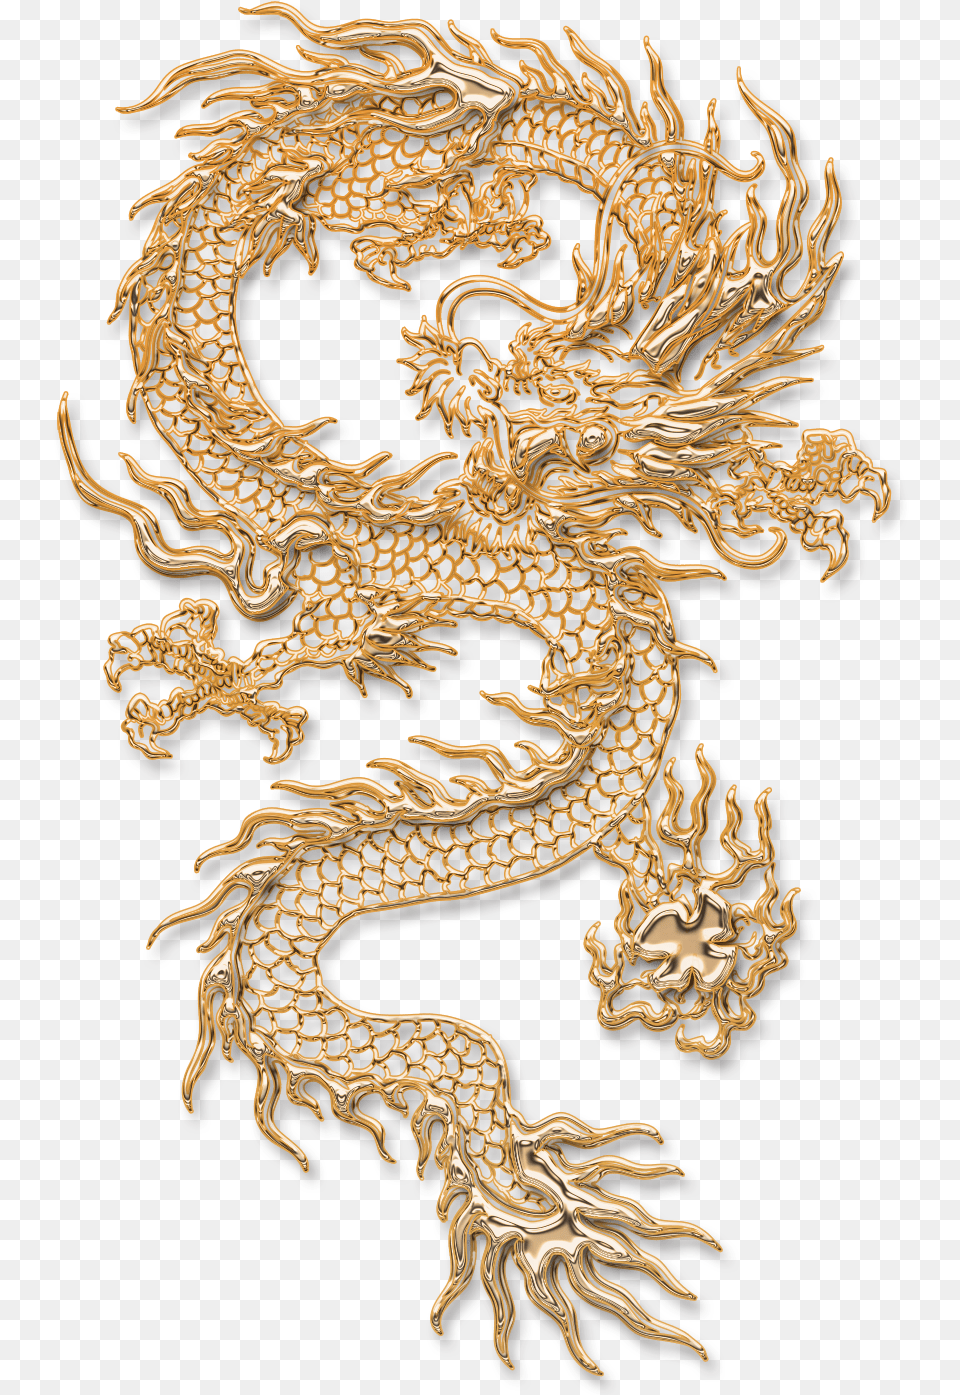 Chinese Dragon Tattoo Illustration Chinese Dragon Tattoo, Gold, Bronze, Accessories Free Transparent Png